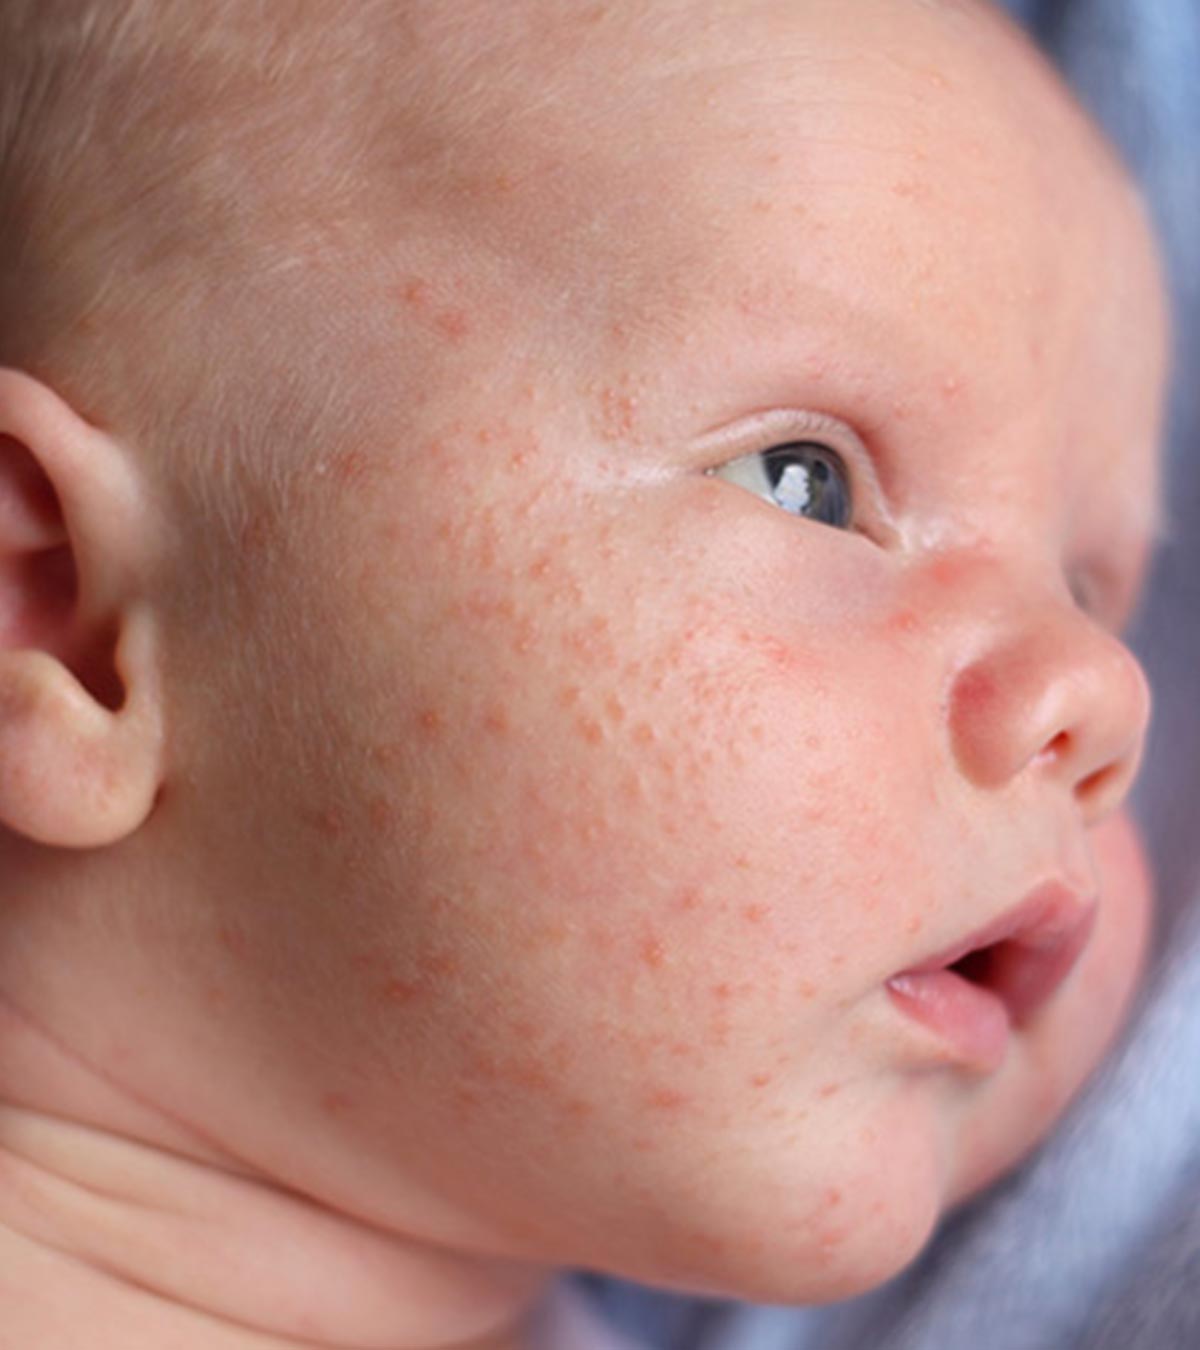 Baby Acne: Causes, Symptoms And How To Get Rid Of It